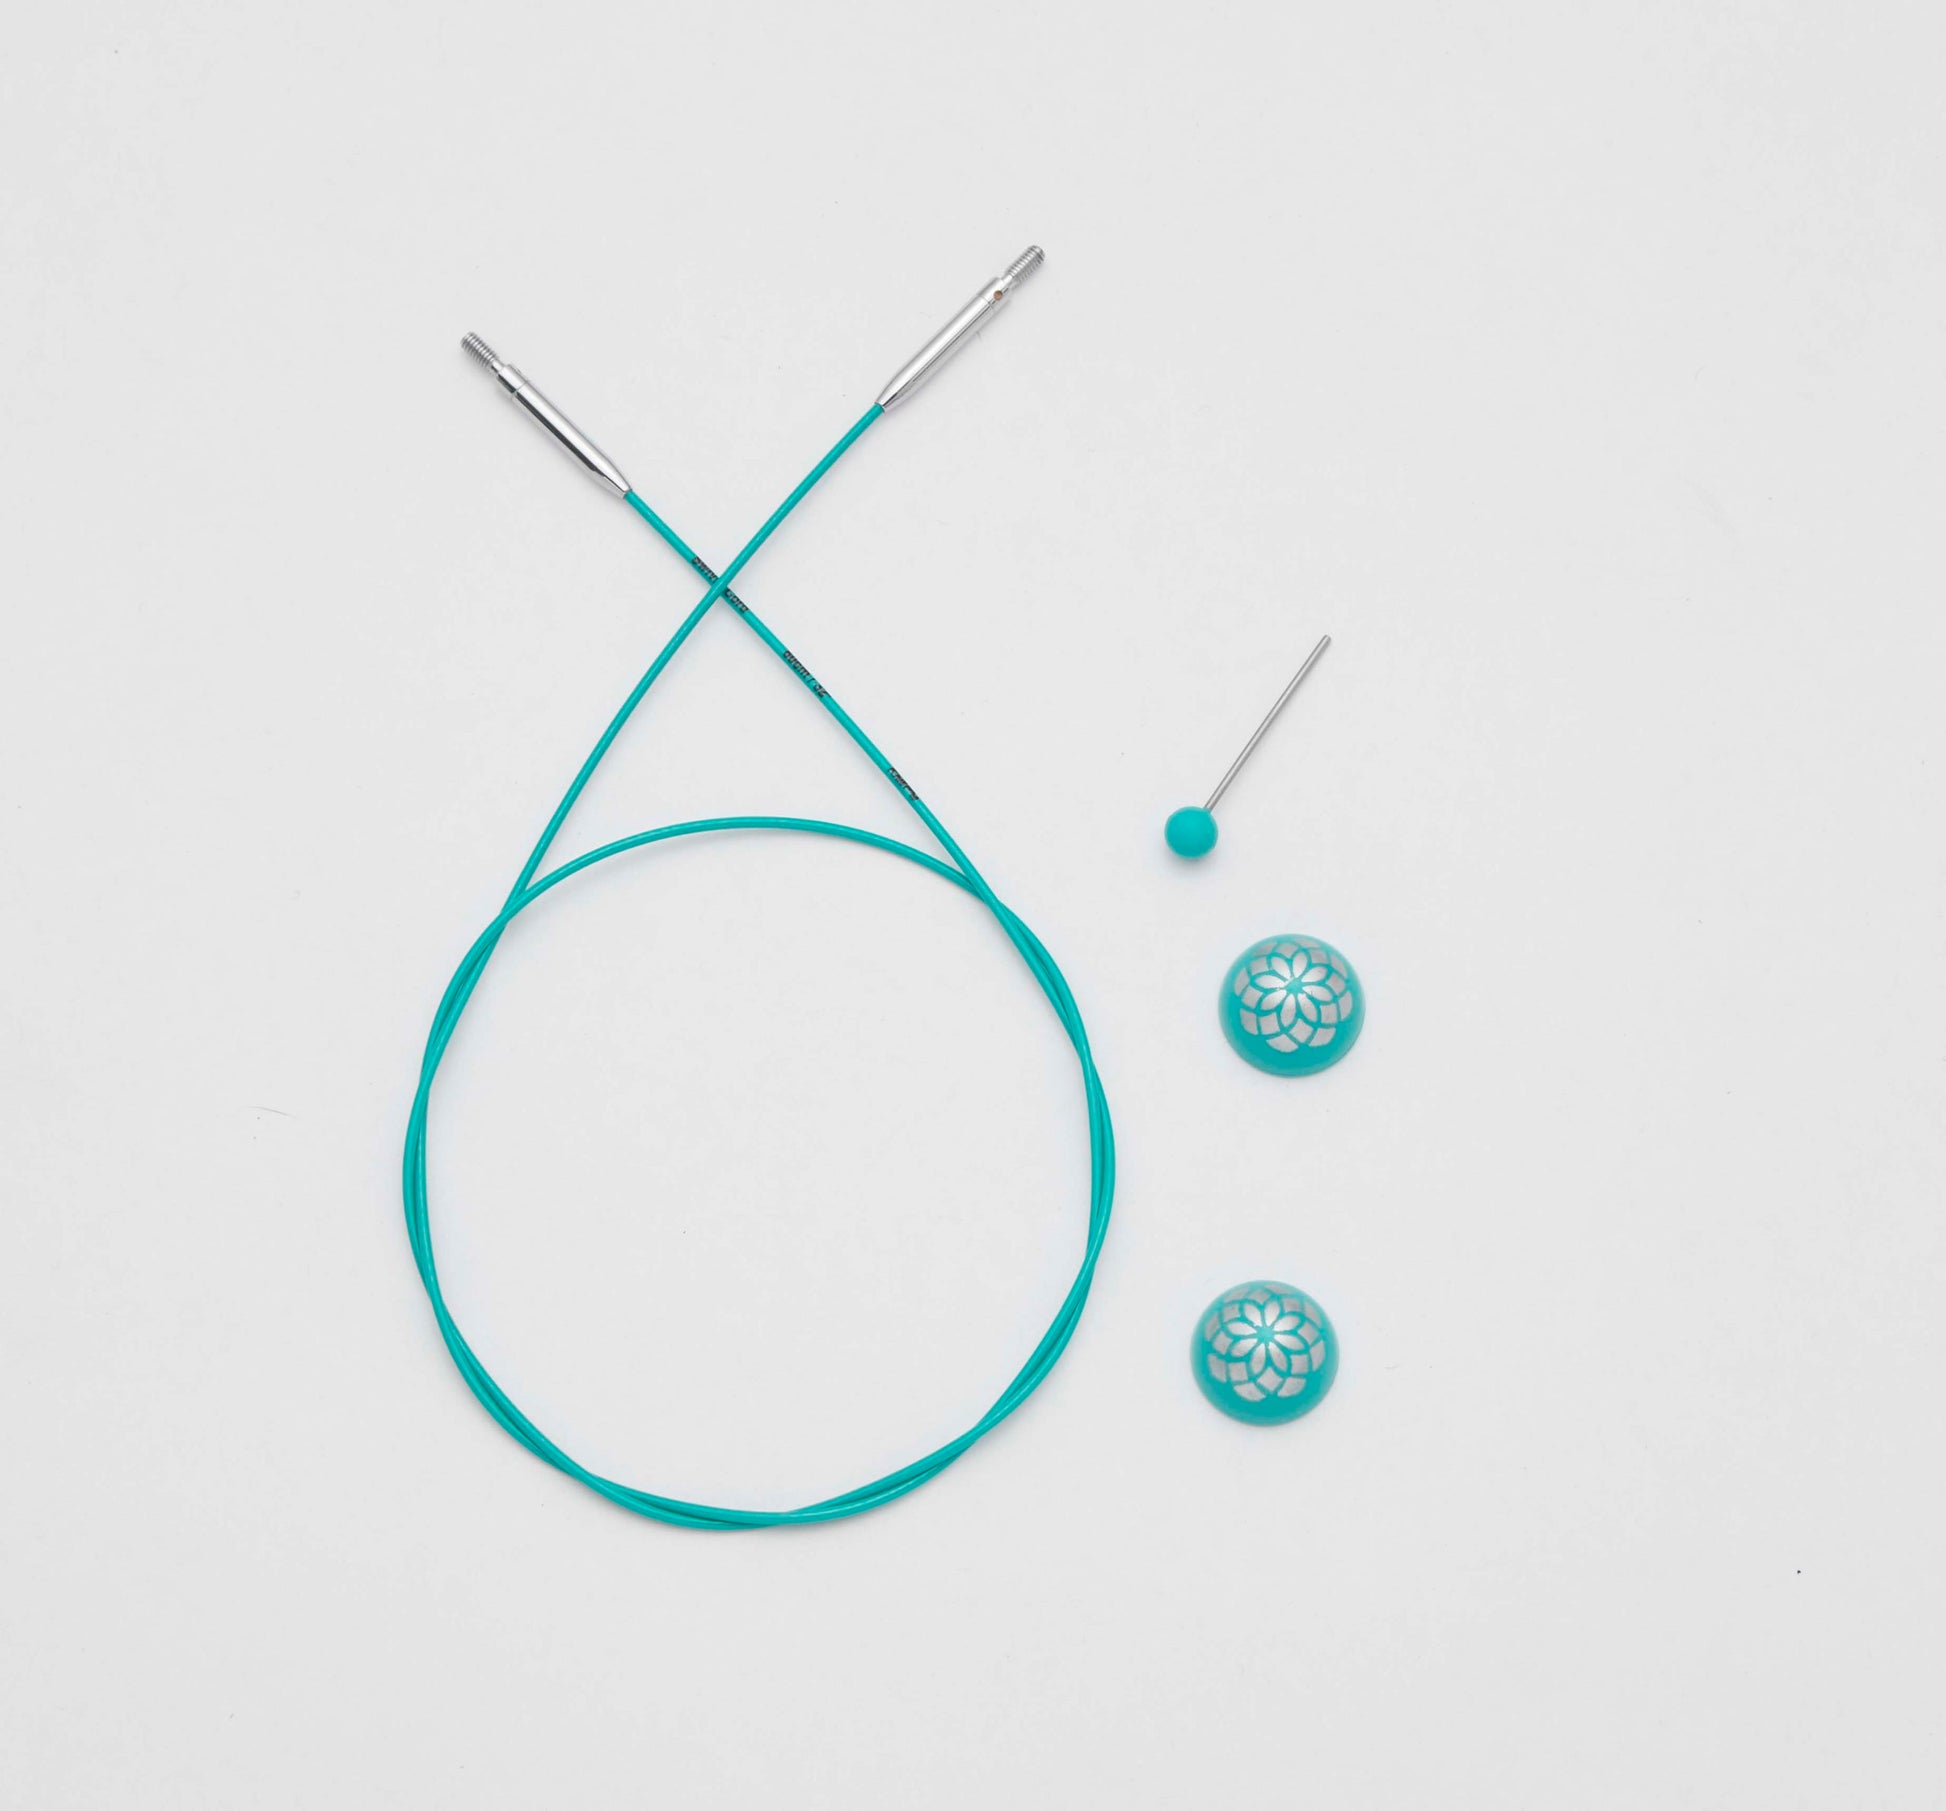 Teal coloured Knit Pro cables